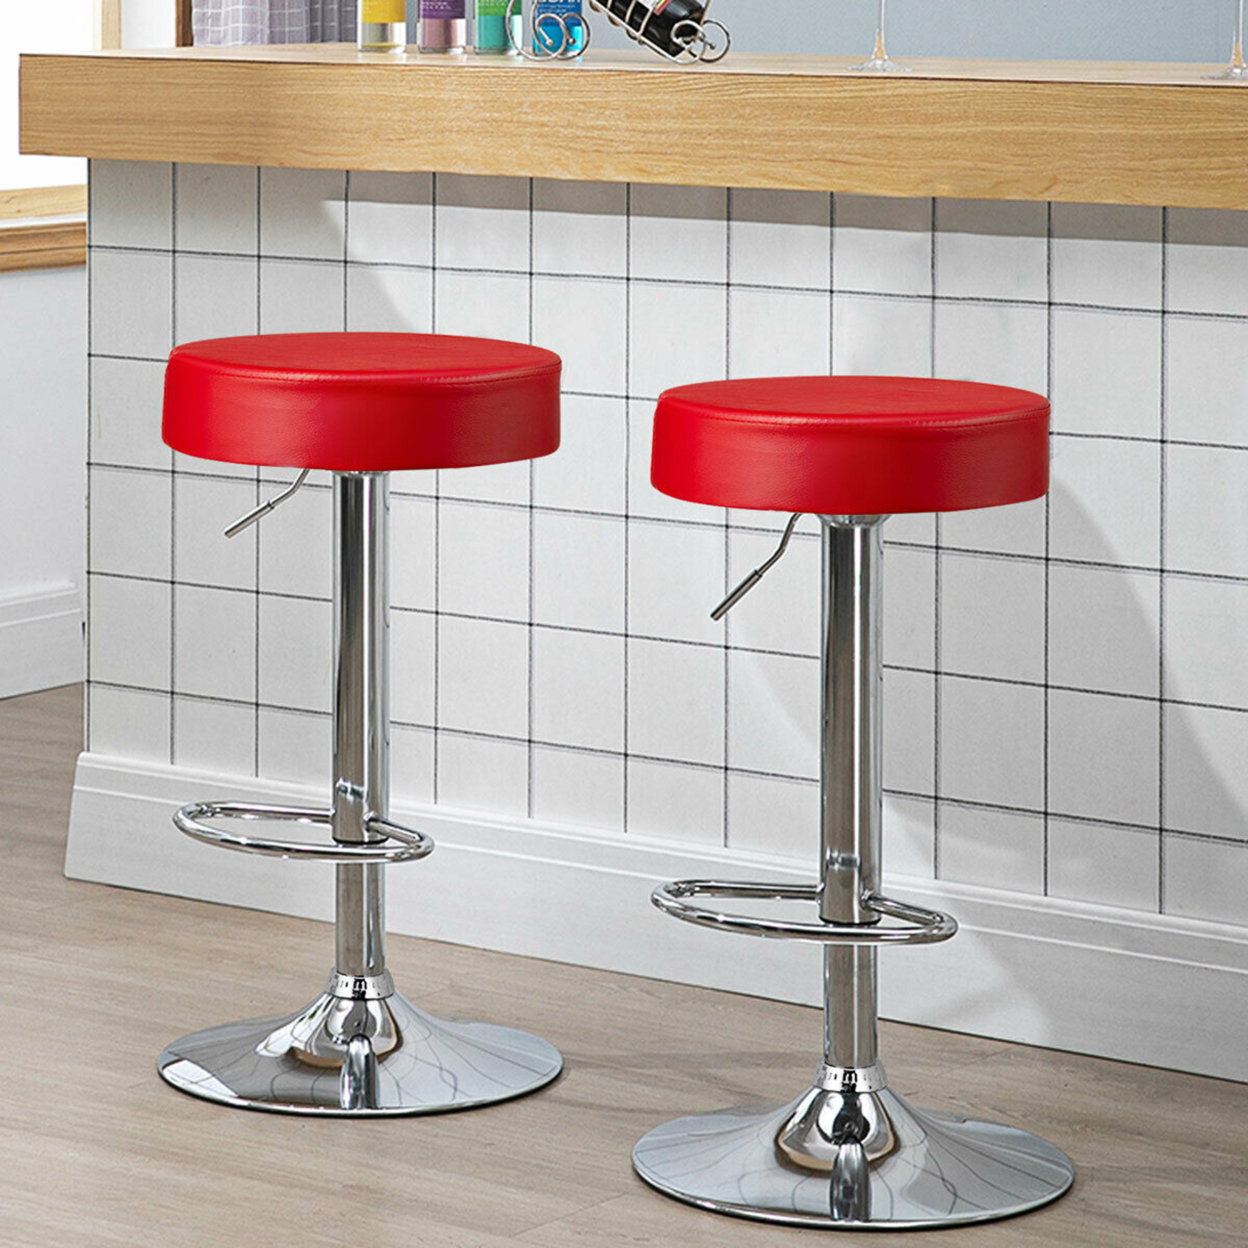 2PCS Adjustable Swivel Bar Stool PU Leather Kitchen Counter Bar Chairs Red